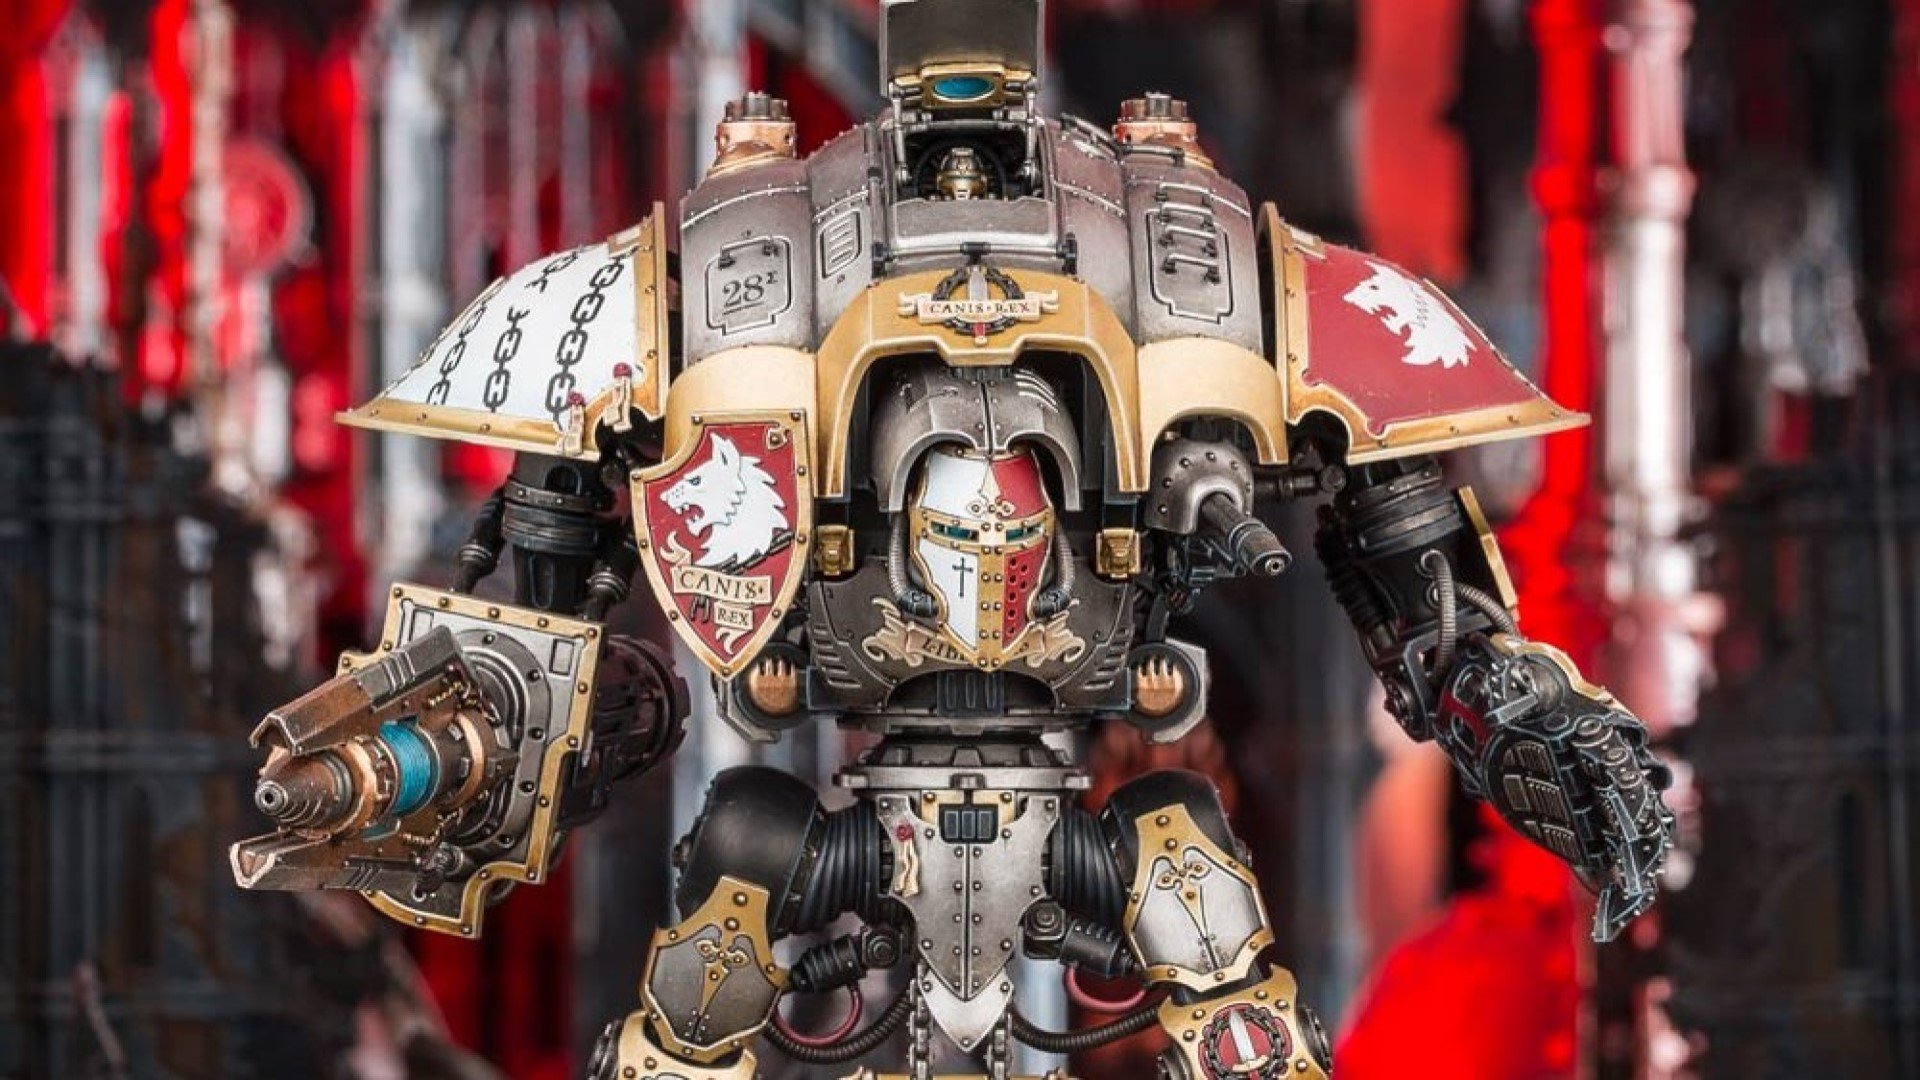 Warhammer 40k Imperial Knights army guide - Warhammer Community photo showing the model for Imperial Knight Canis Rex